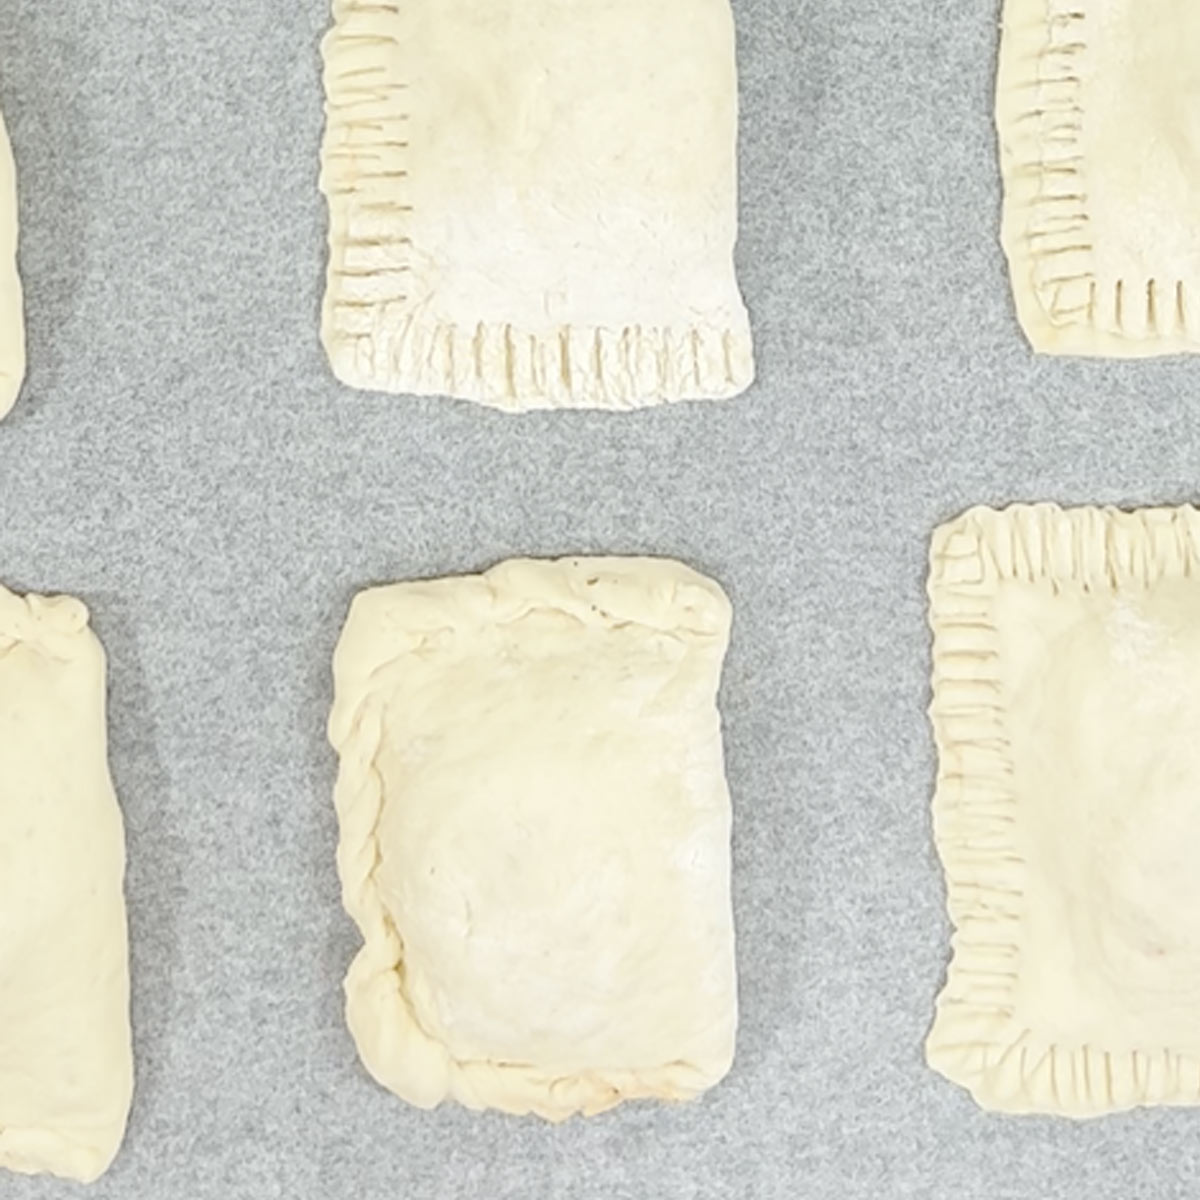 place pizza pockets on a baking pan lined with parchment paper